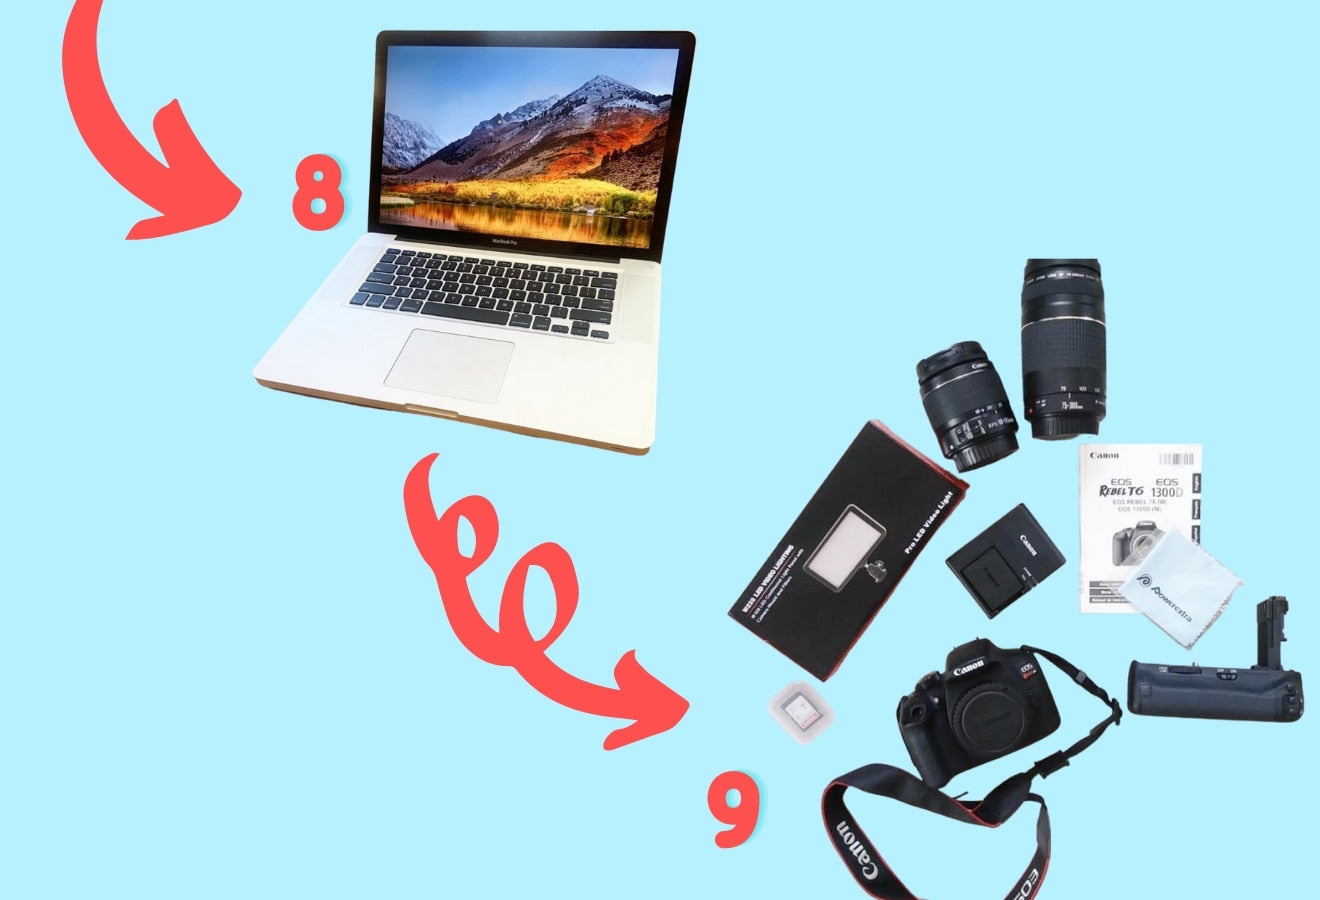 Trades 8 and 9 - a 2011 macbook and a canon camera set